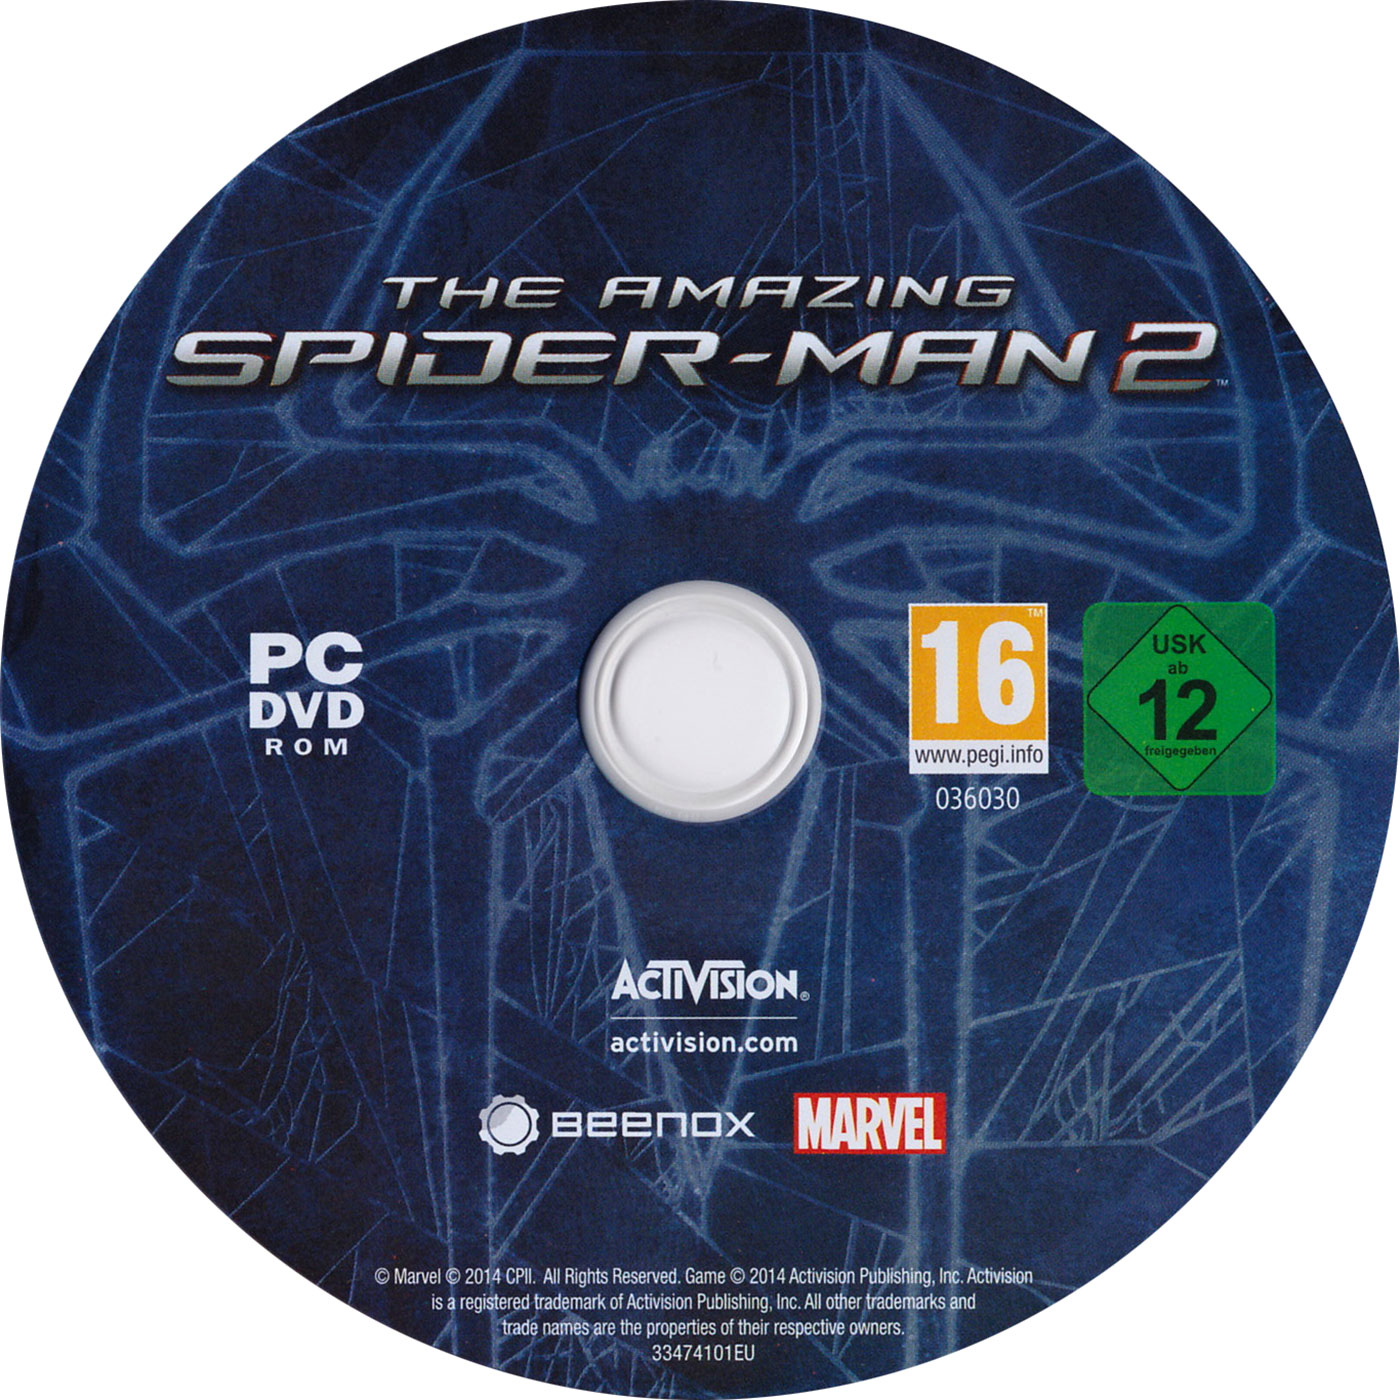 The Amazing Spider-Man 2 - CD obal